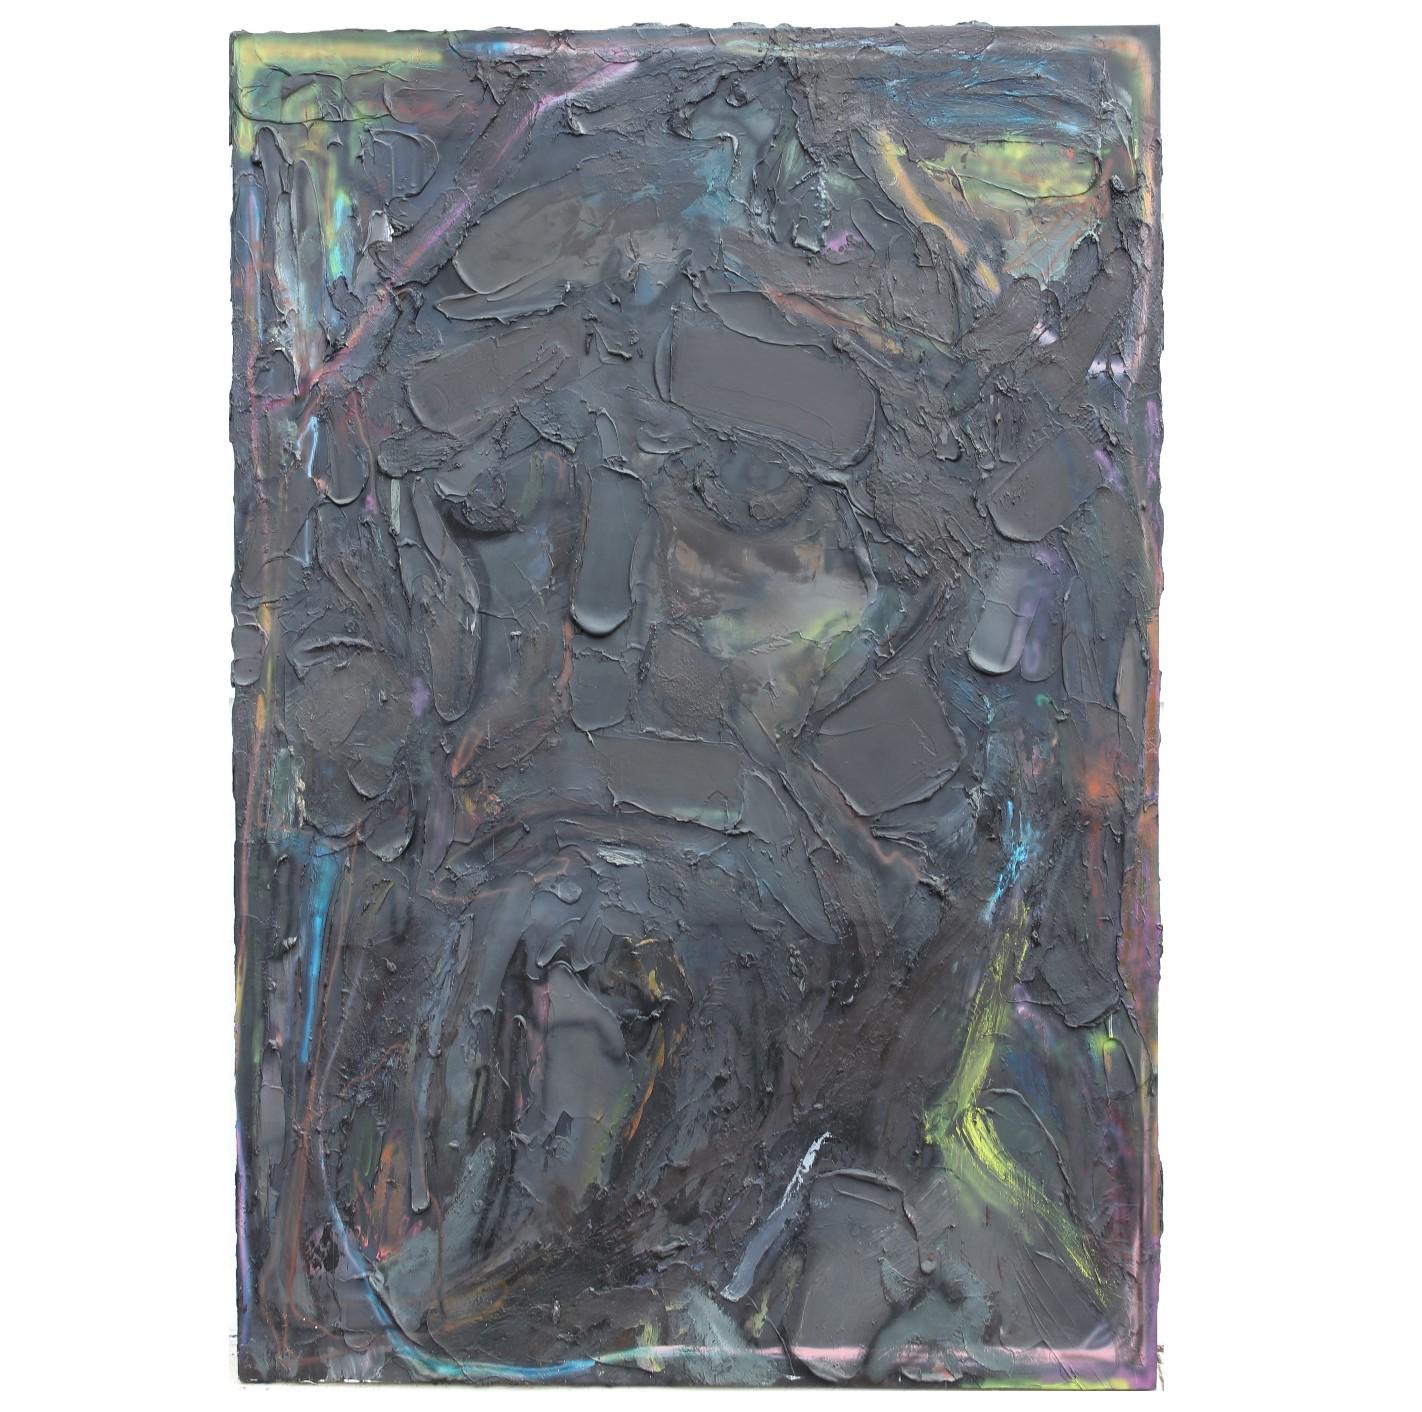 Geoff Hippenstiel Abstract Painting - "Black Prophet" Large Impasto Expressionist Painting 